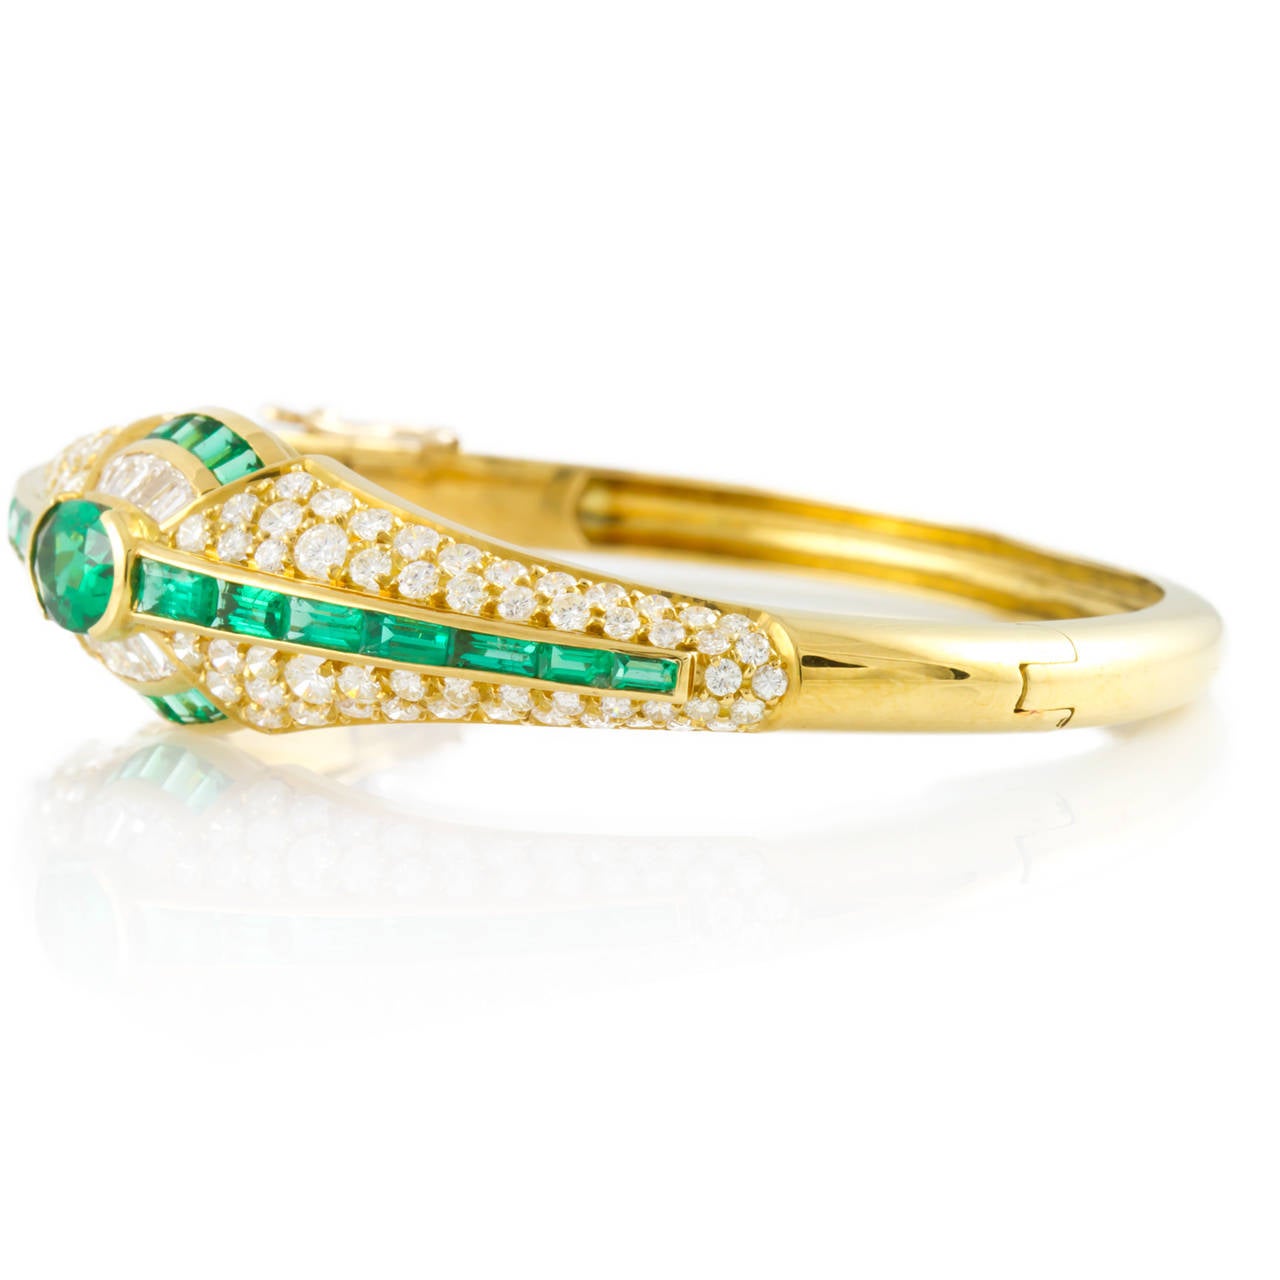 Lady's 18K yellow gold hinged bangle bracelet with two figure eight safeties, half bezel-set with one (1) Oval Mixed cut Emerald, channel-set with fourteen (14) Baguette cut Emeralds, channel-set with ten (10) Square Step cut Emeralds, channel-set